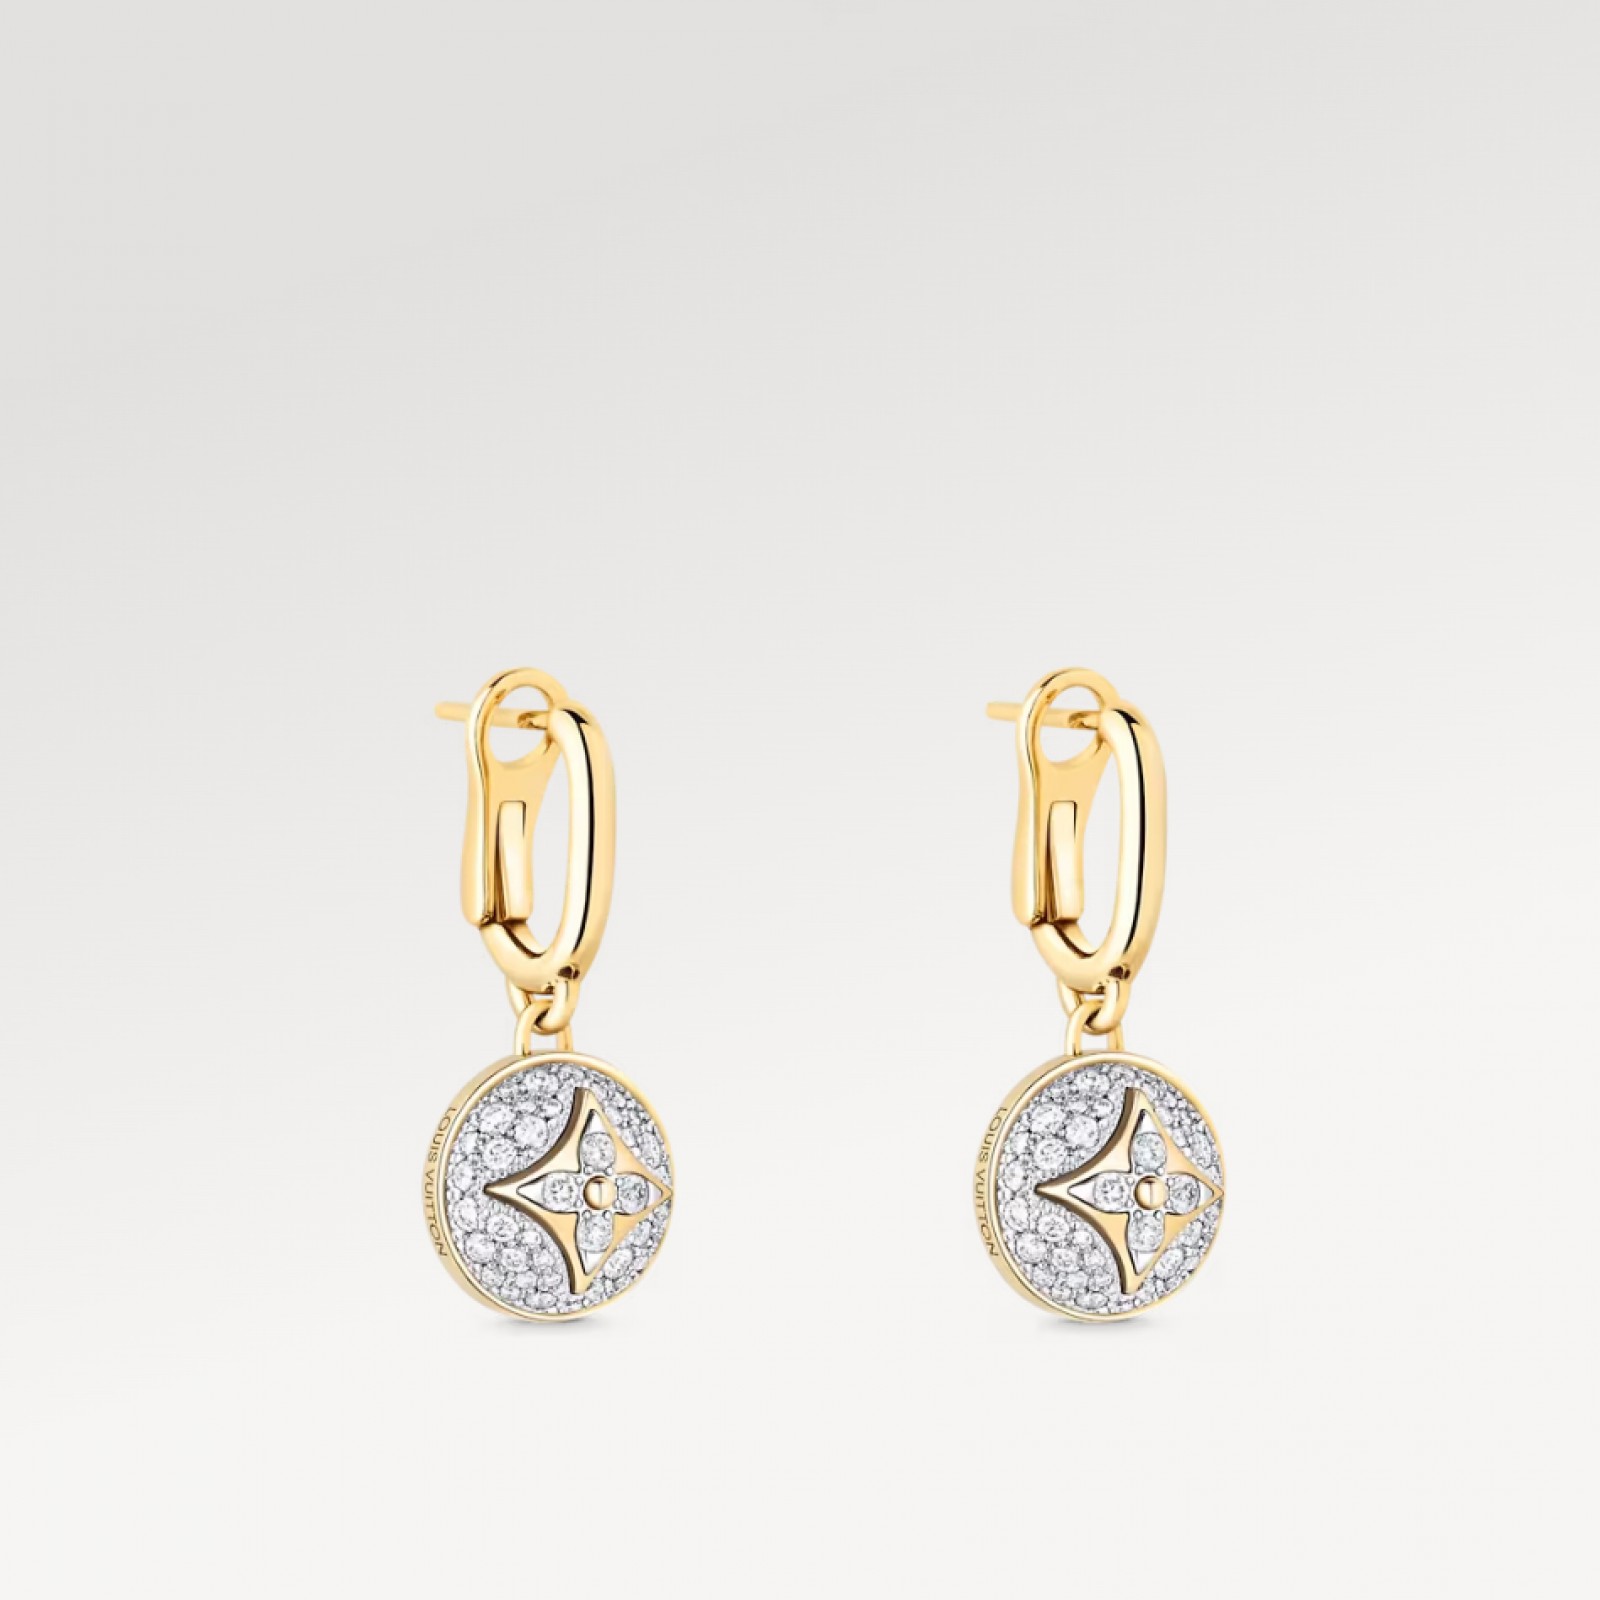 Color Blossom Earrings, Yellow Gold, White Gold And Pavé Diamond